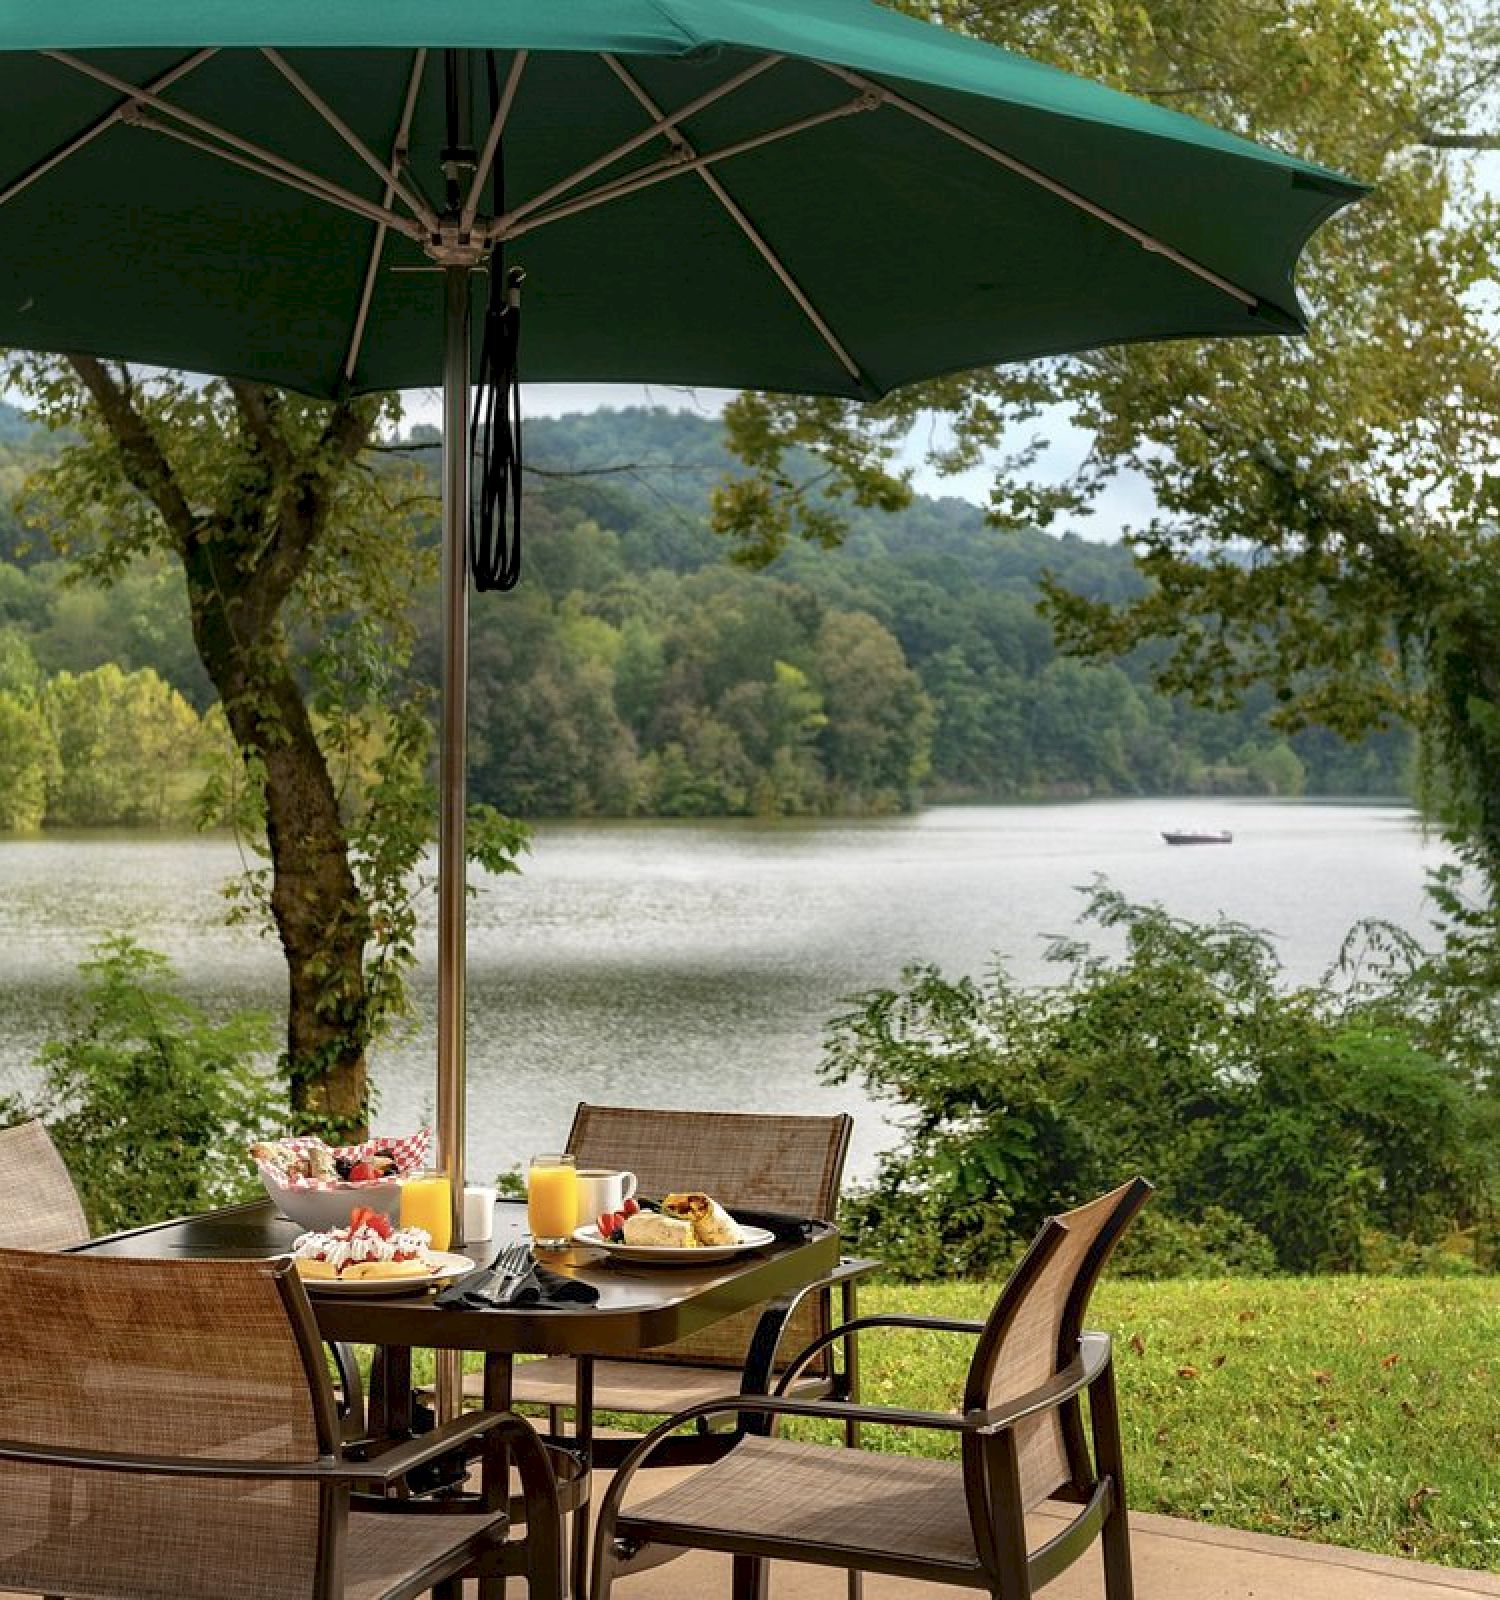 An outdoor dining setup with a table and chairs, under a green umbrella, overlooking a serene lake and lush greenery in the background.